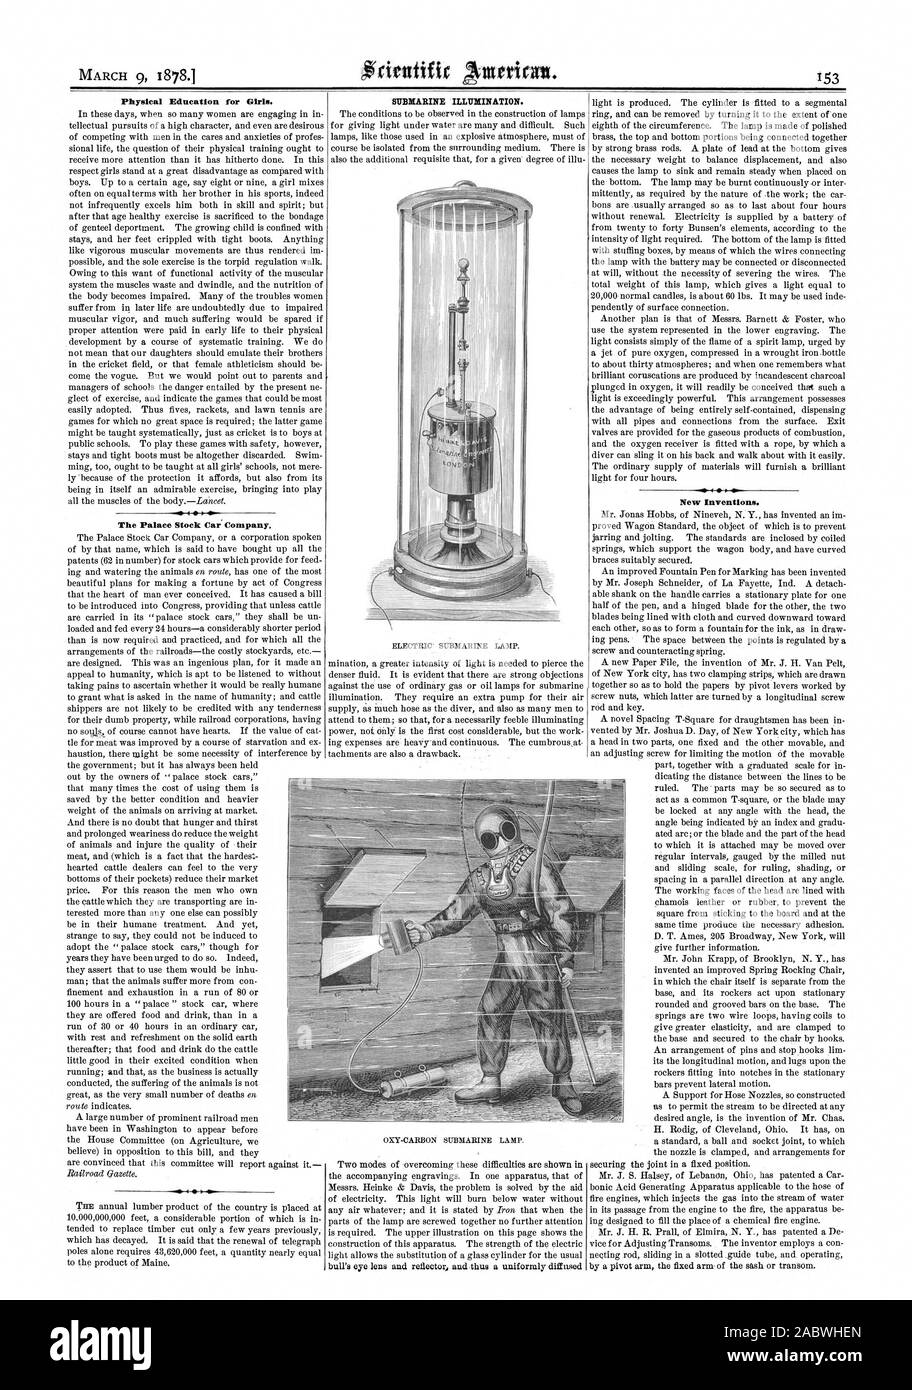 Physical Education for Girls. The Palace Stock Car' Company. SUBMARINE ILLUMINATION. New Inventions., scientific american, 1878-03-09 Stock Photo